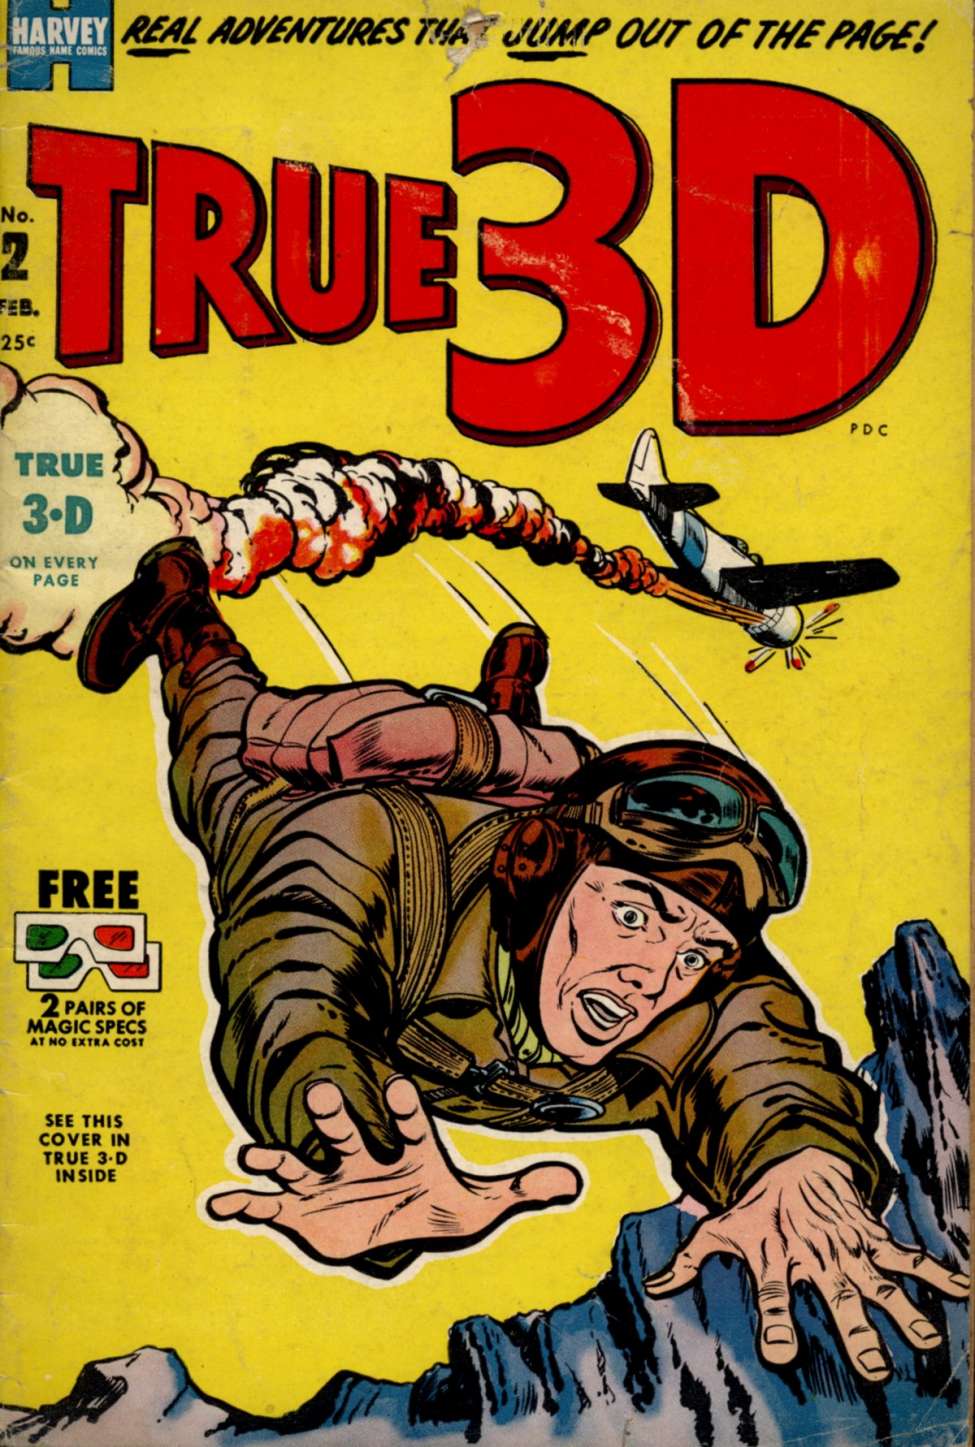 Comic Book Cover For True 3-D 2